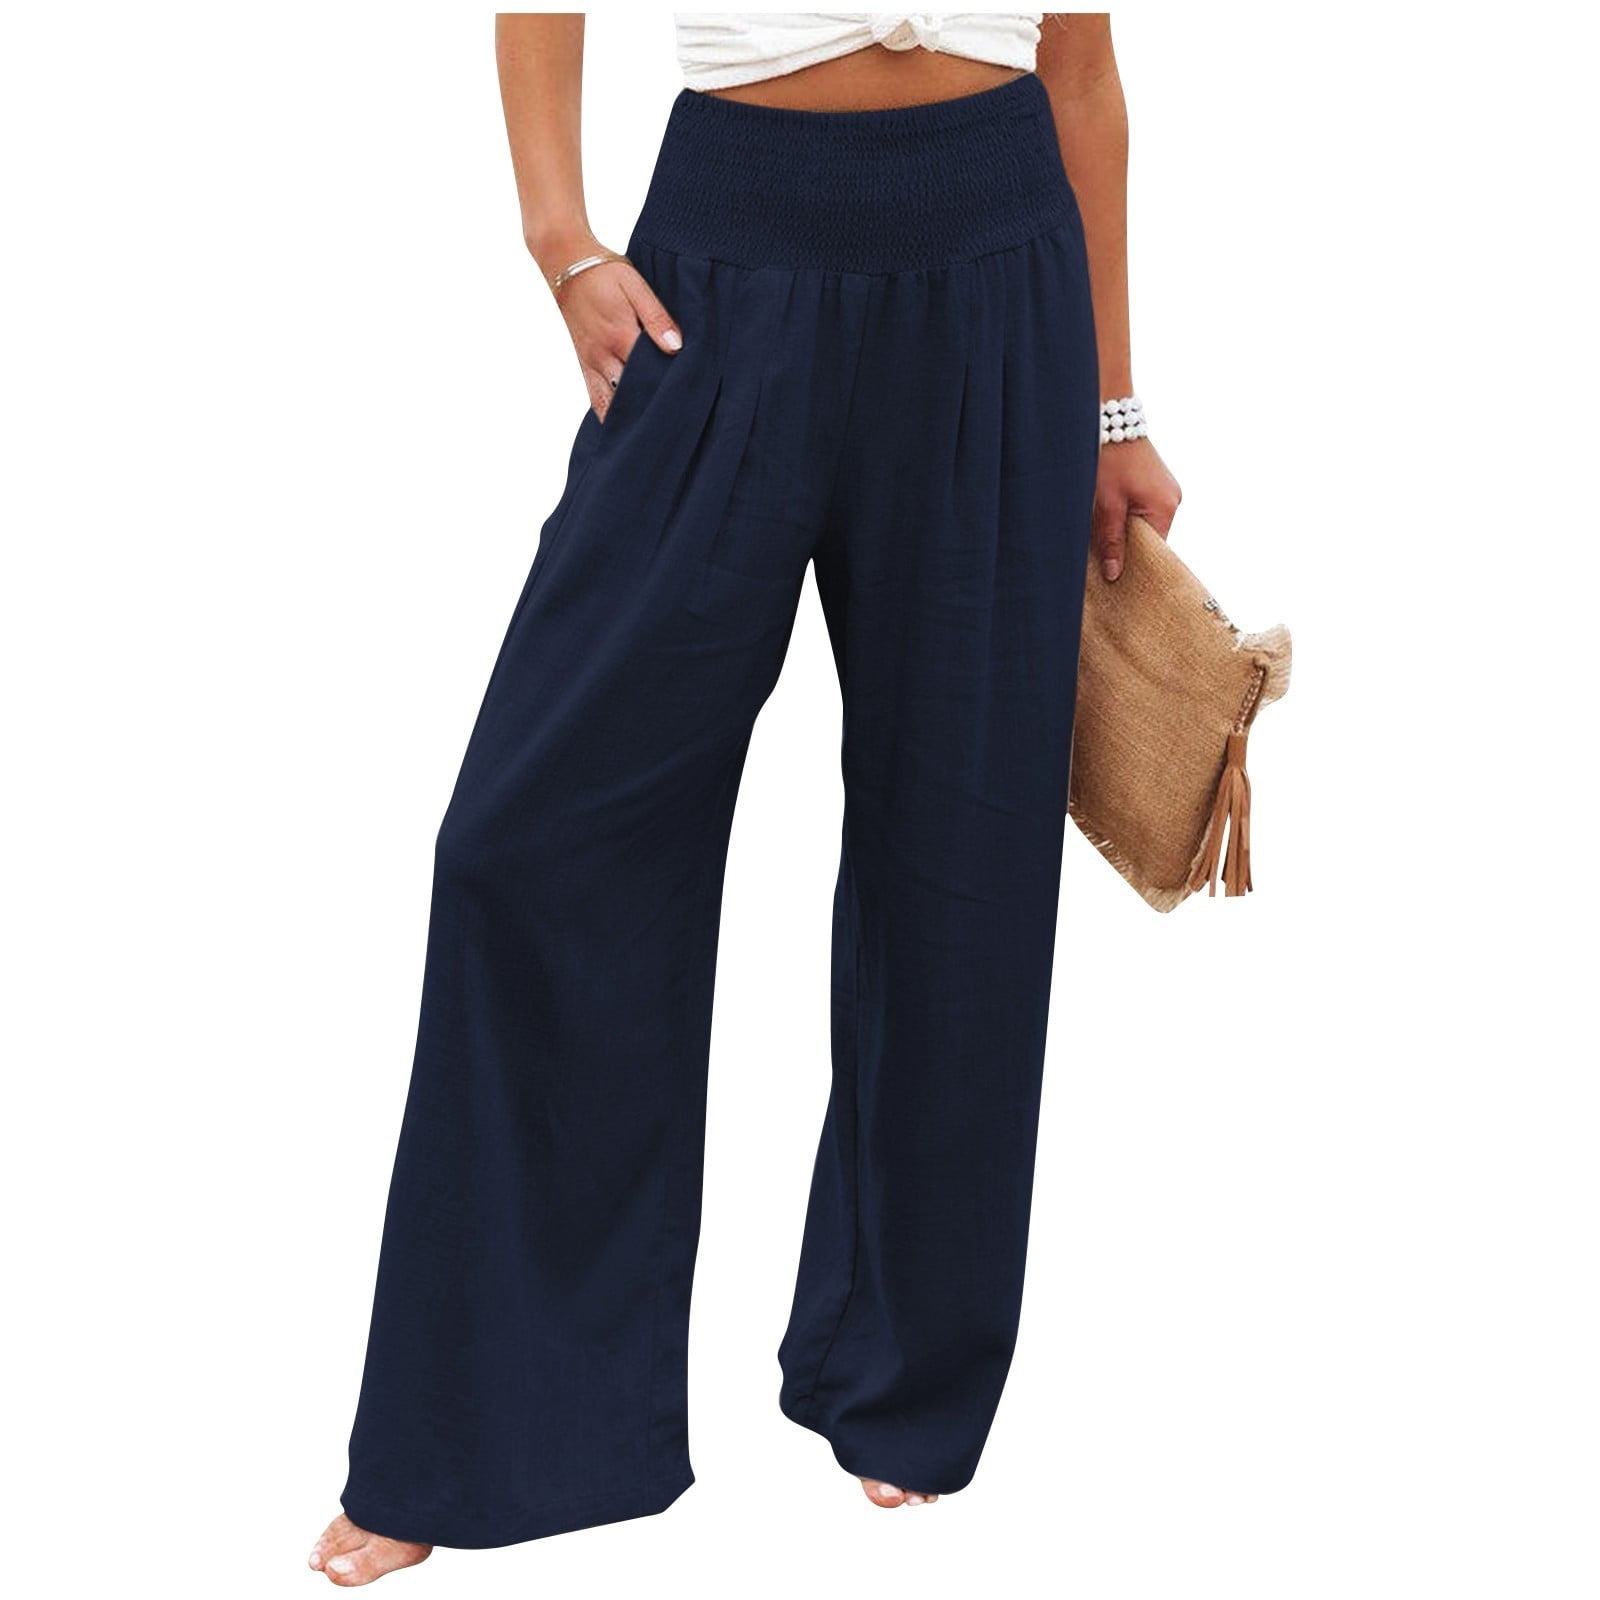 Blue Linen Pants, Washed Linen Bottoms, Palazzo, High Waisted, Baggy Pants  With Pockets, Loose Fit, Wide Leg Pants, Plus Size Clothing -  Canada